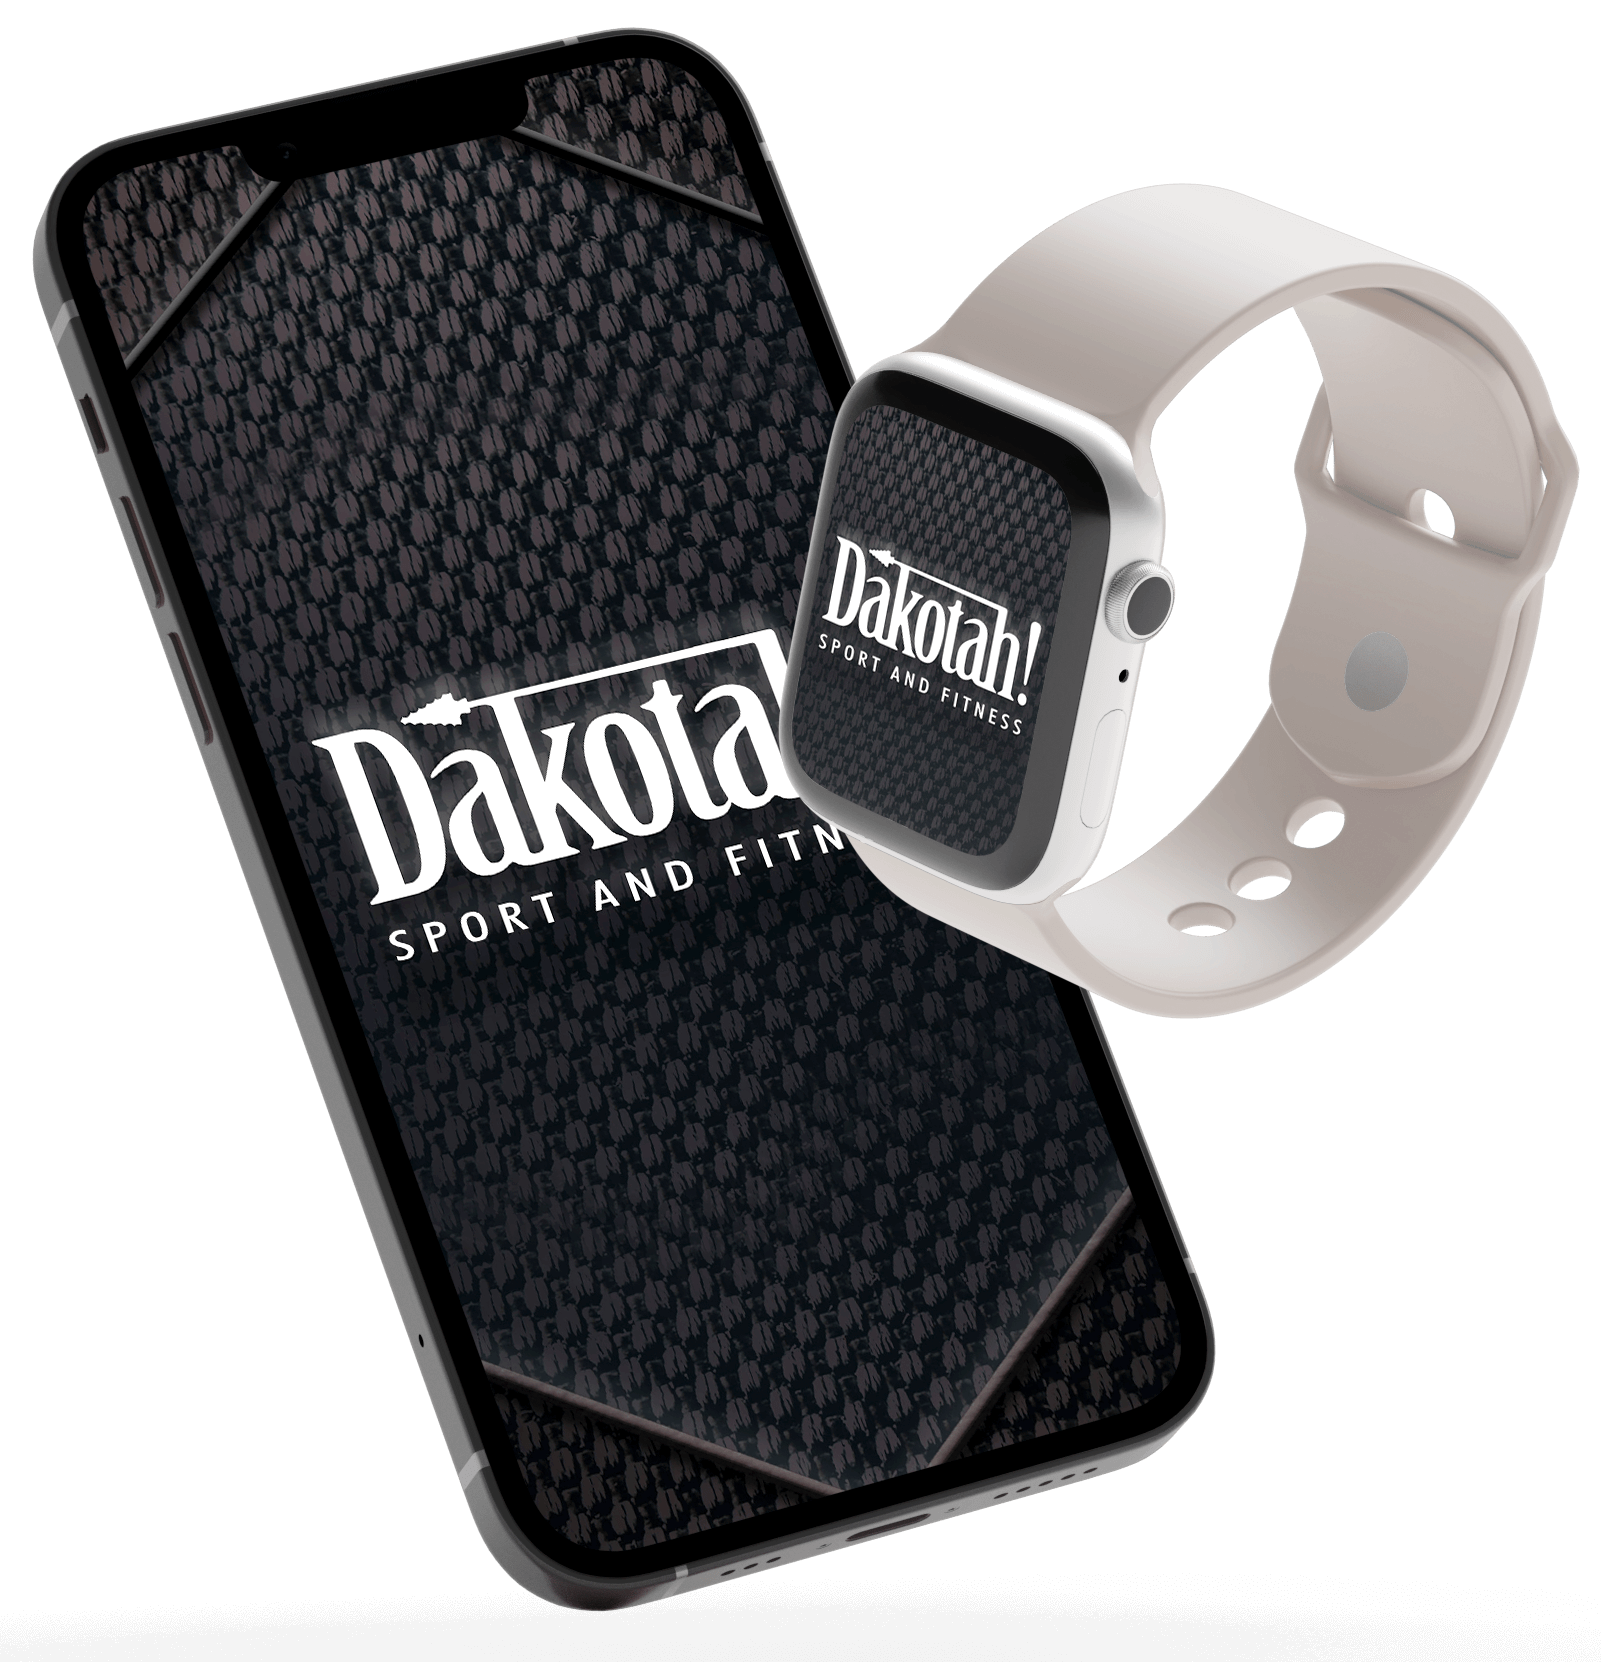 iPhone and iWatch displaying Dakotah! Sport and Fitness app